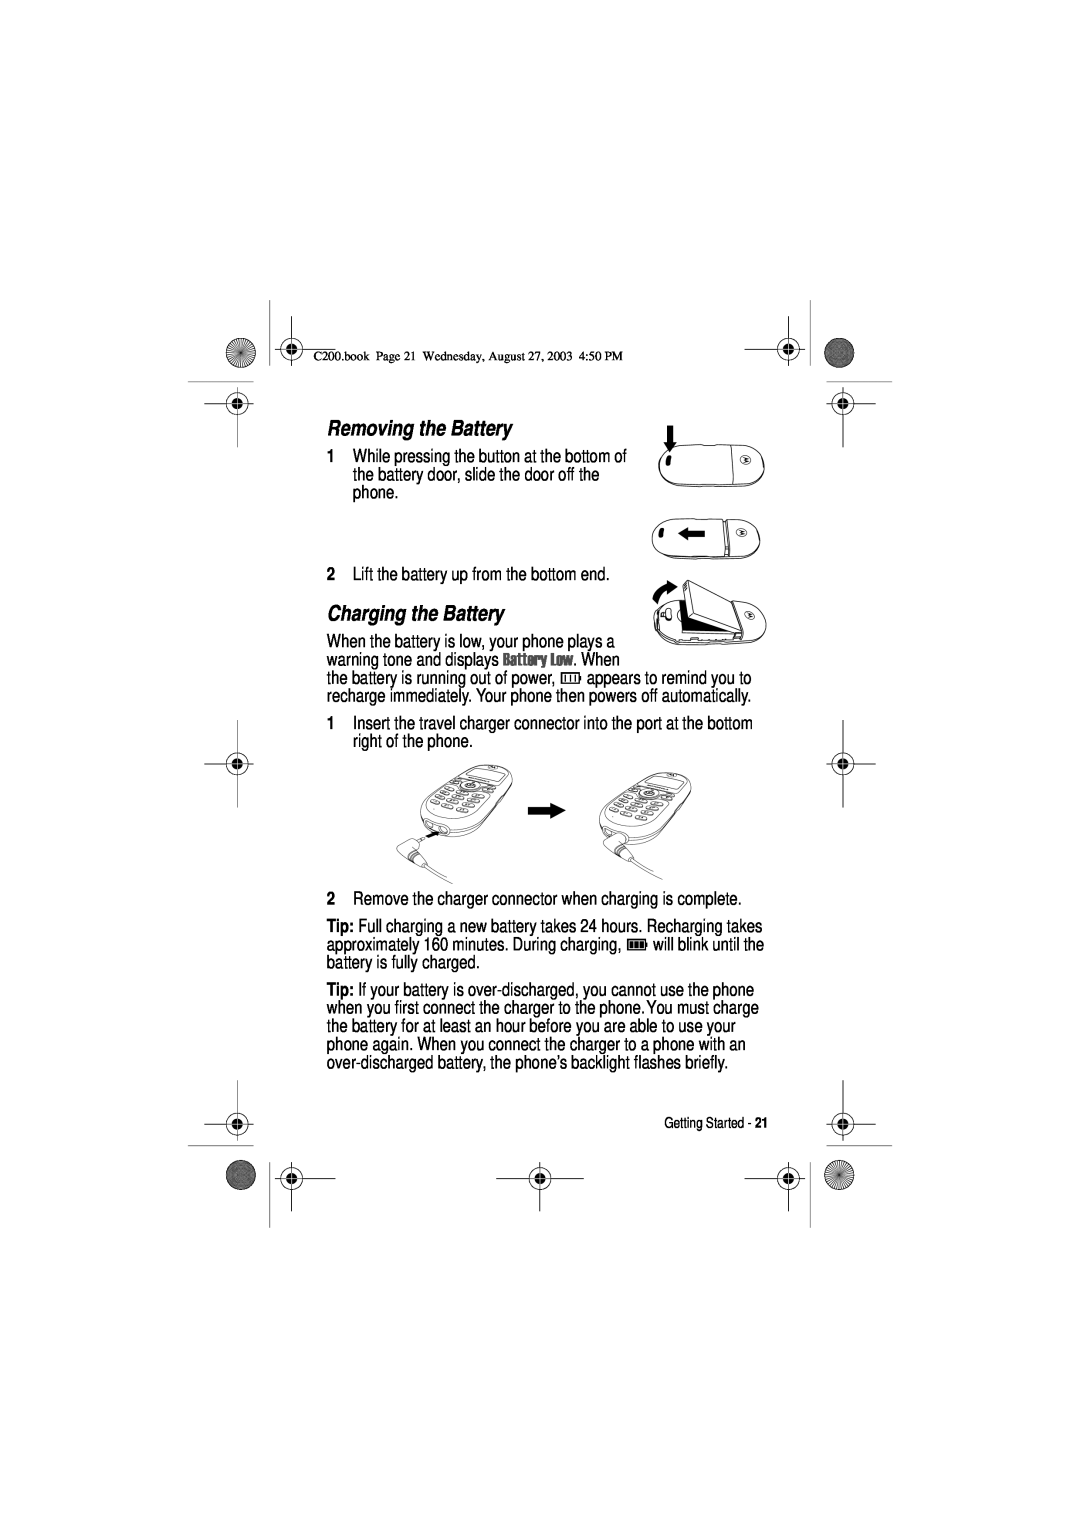 Motorola C200 manual Removing the Battery, Charging the Battery 